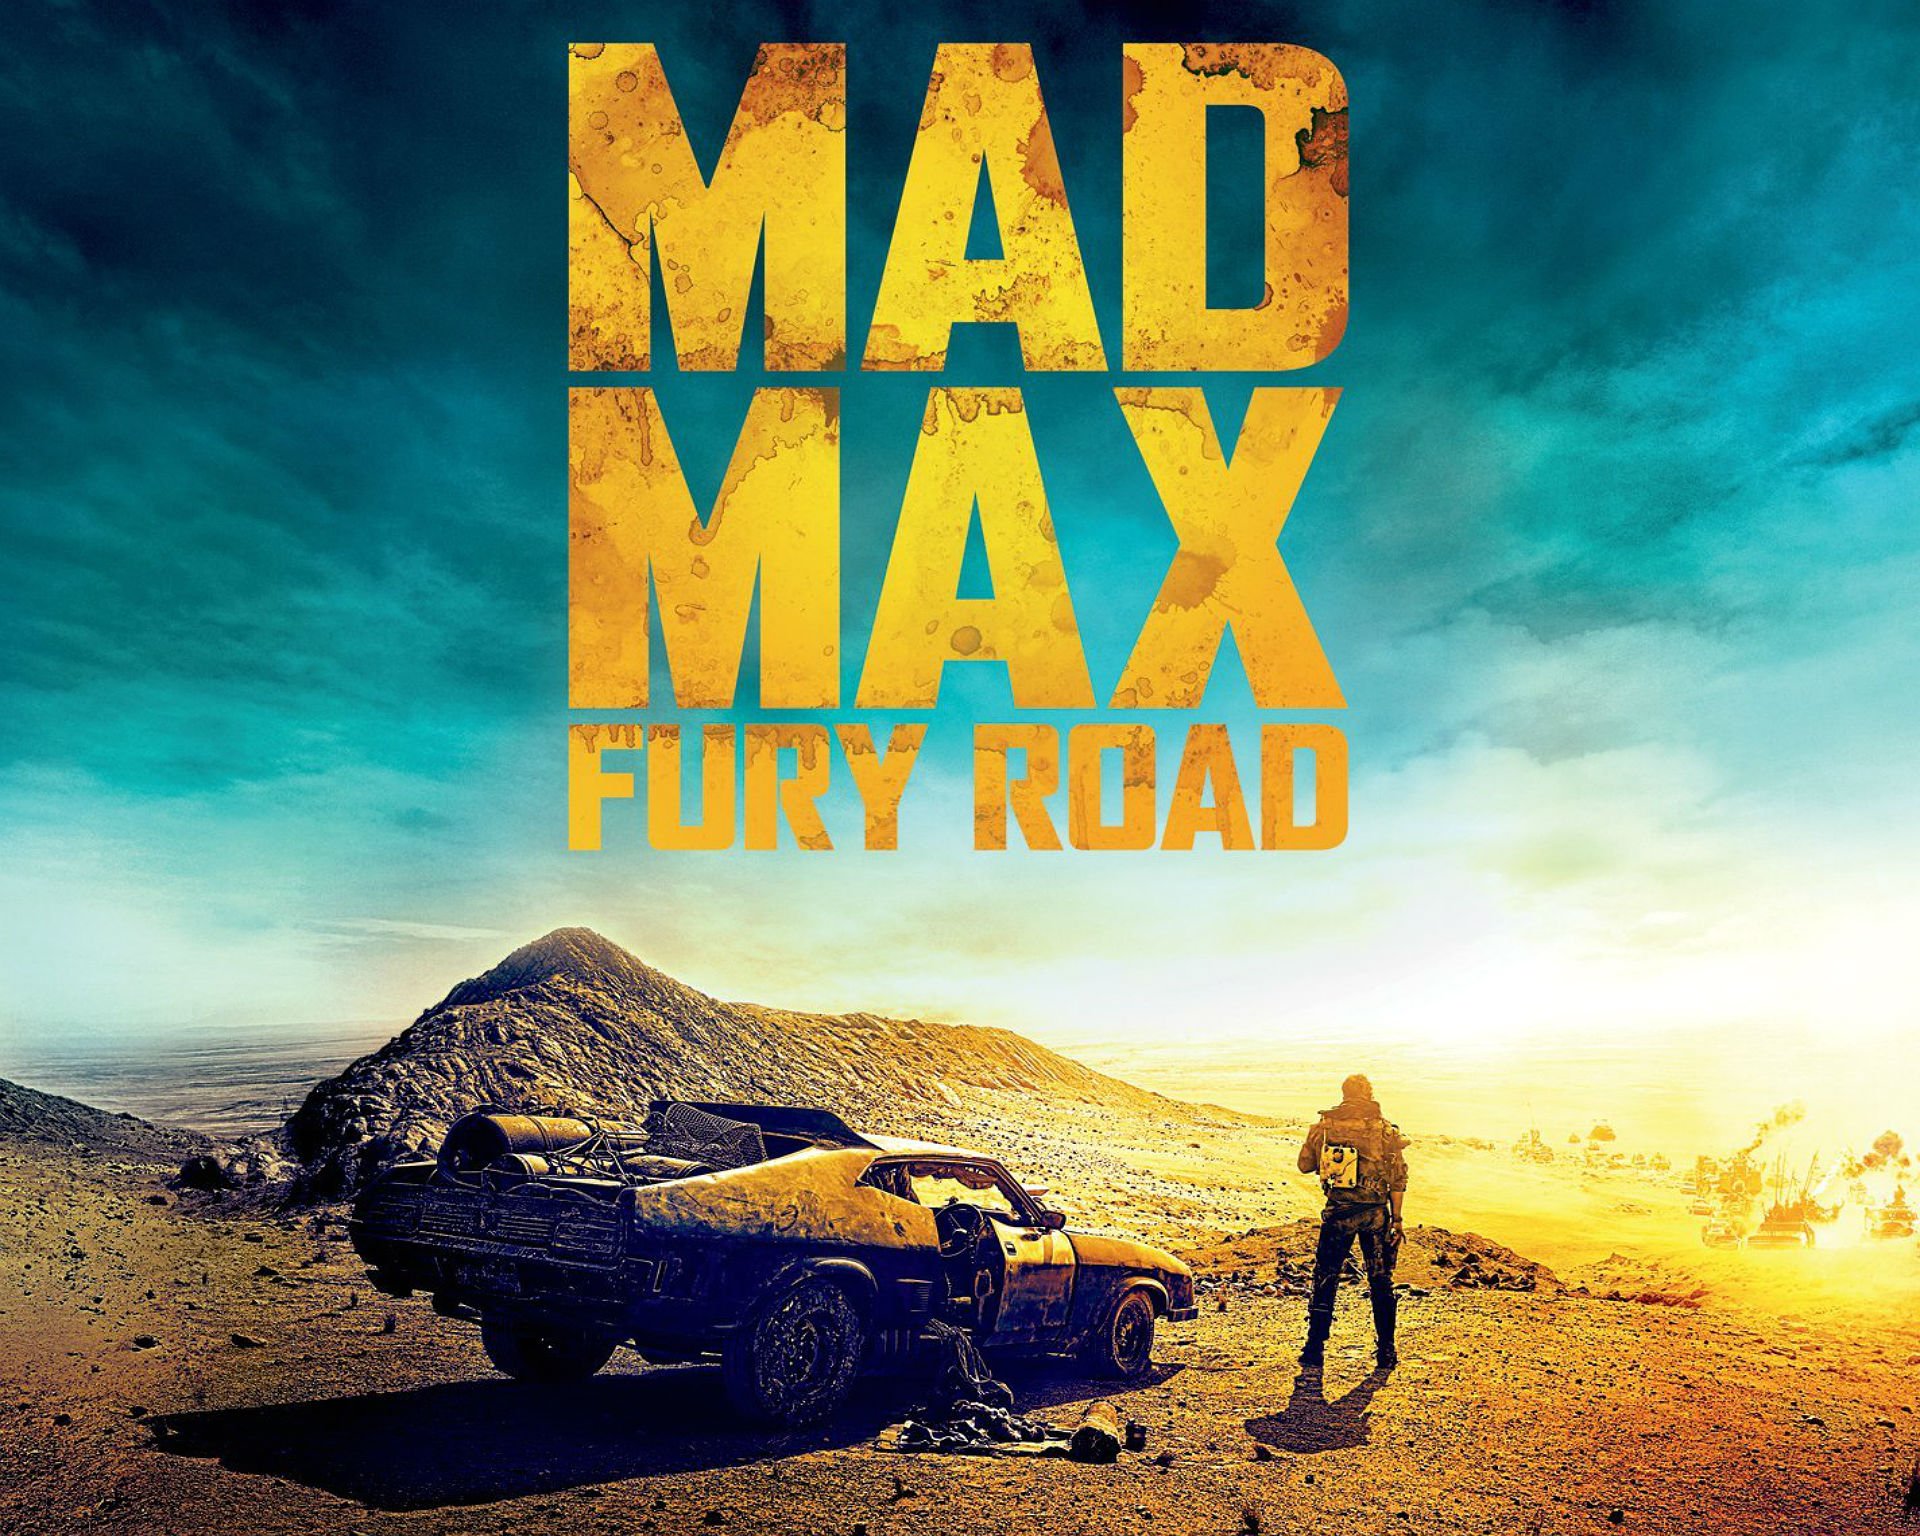 mad, Max, Fury, Road, Sci fi, Futuristic, Action, Fighting, Adventure, 1mad max, Apocalyptic, Road, Warrior, Poster Wallpaper